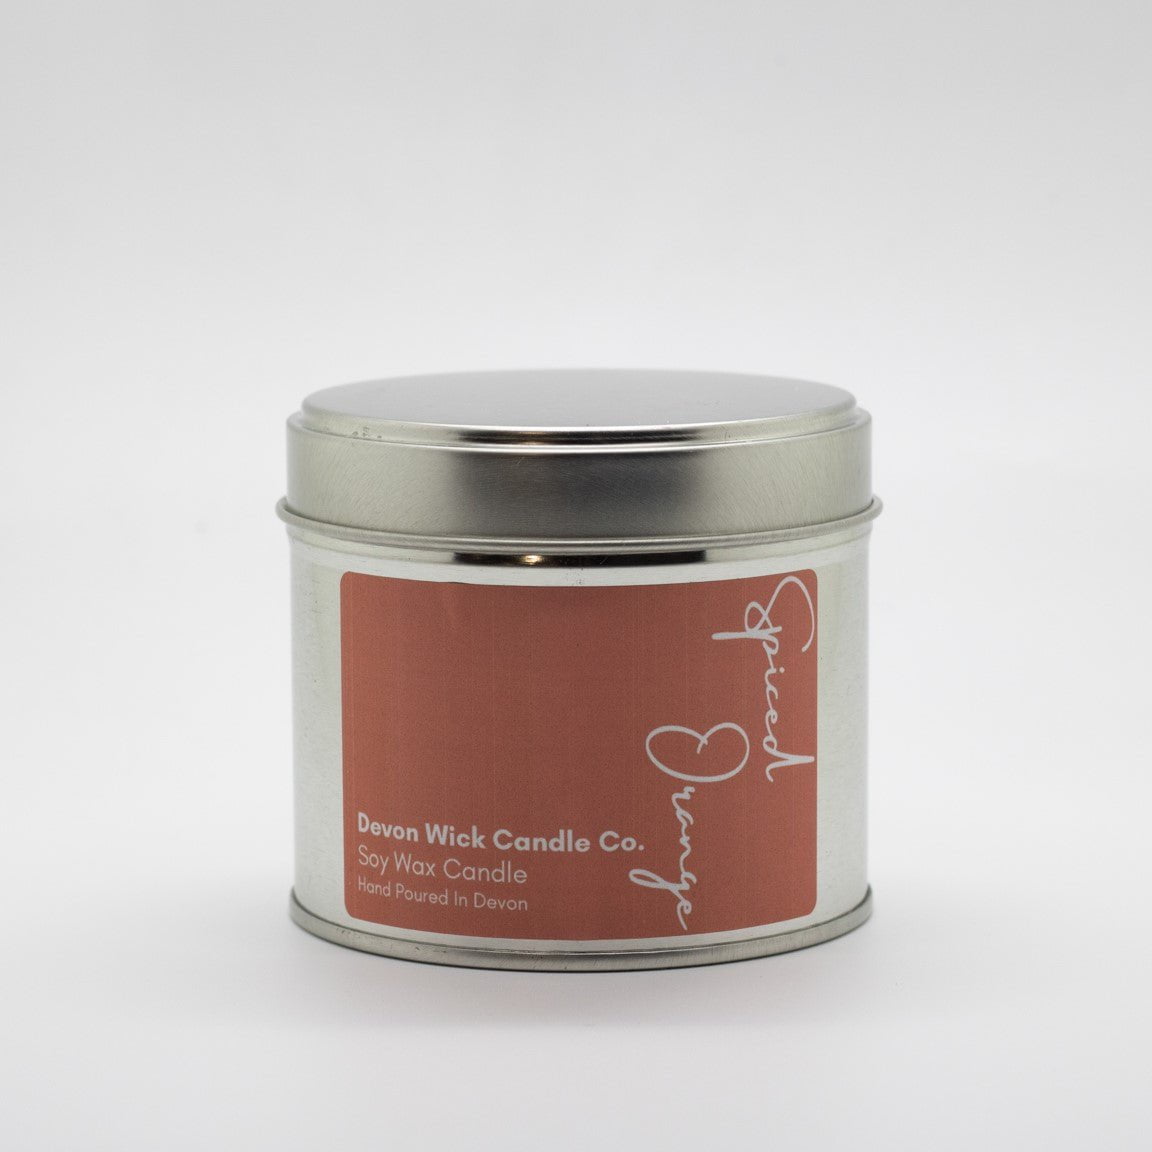 Devon Wick Candle Co. Limited Spiced Orange Soy Wax Tinned Candle